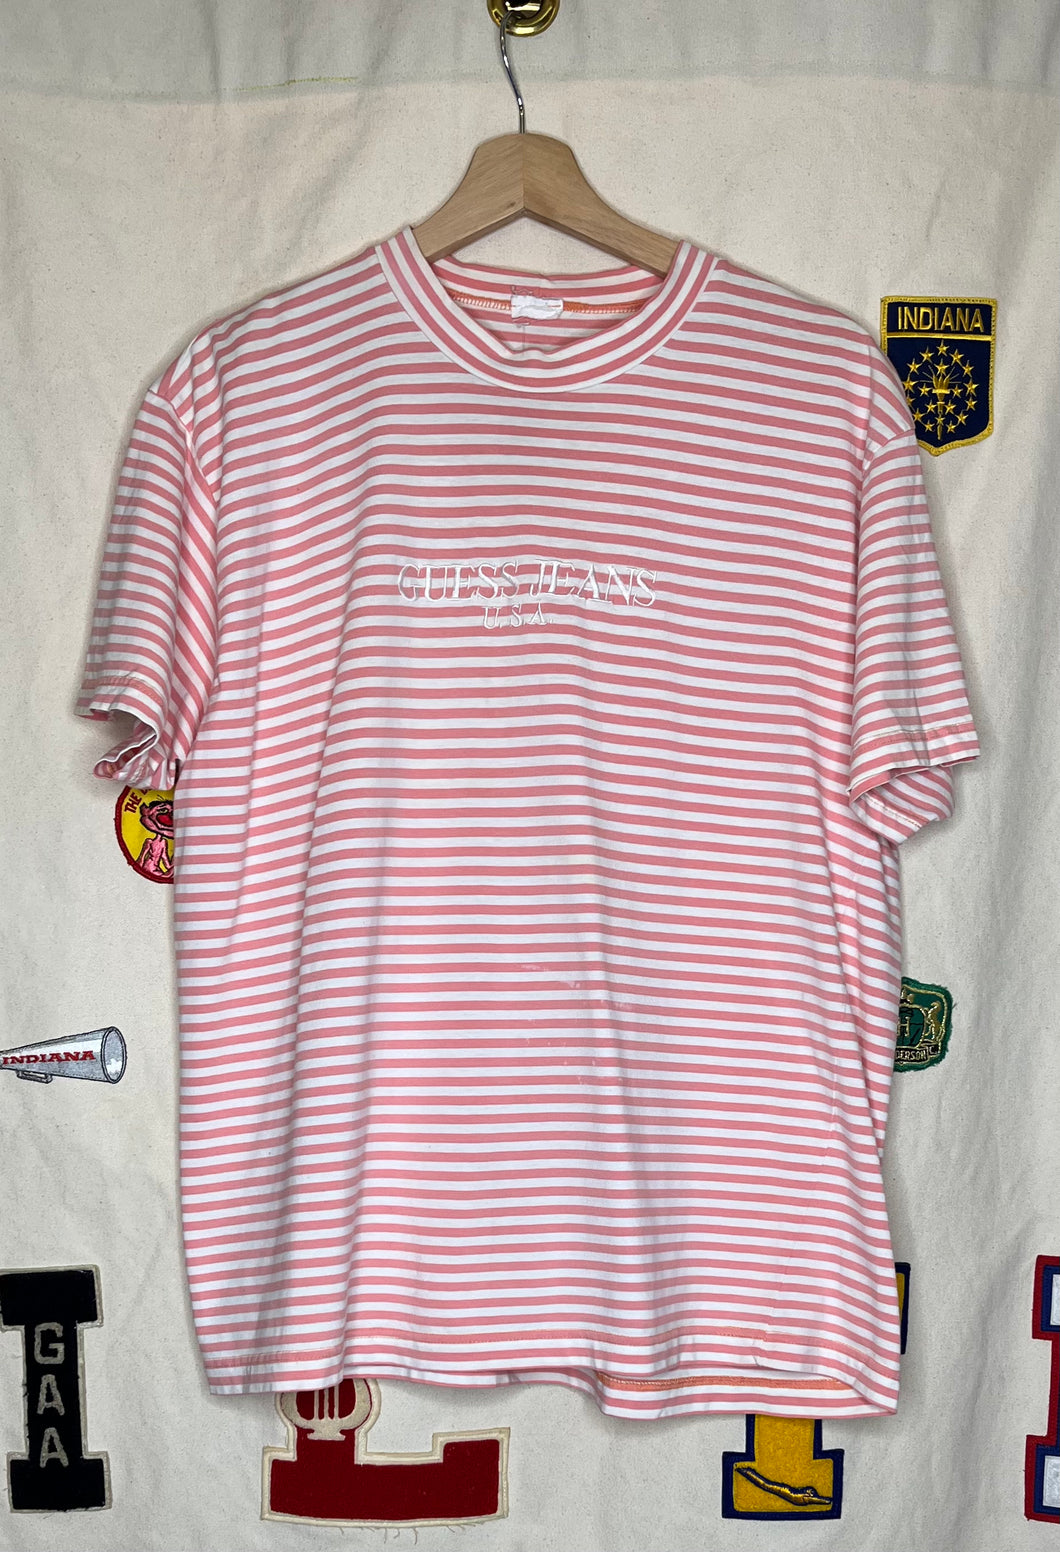 Guess Jeans Striped Pink T-Shirt: L